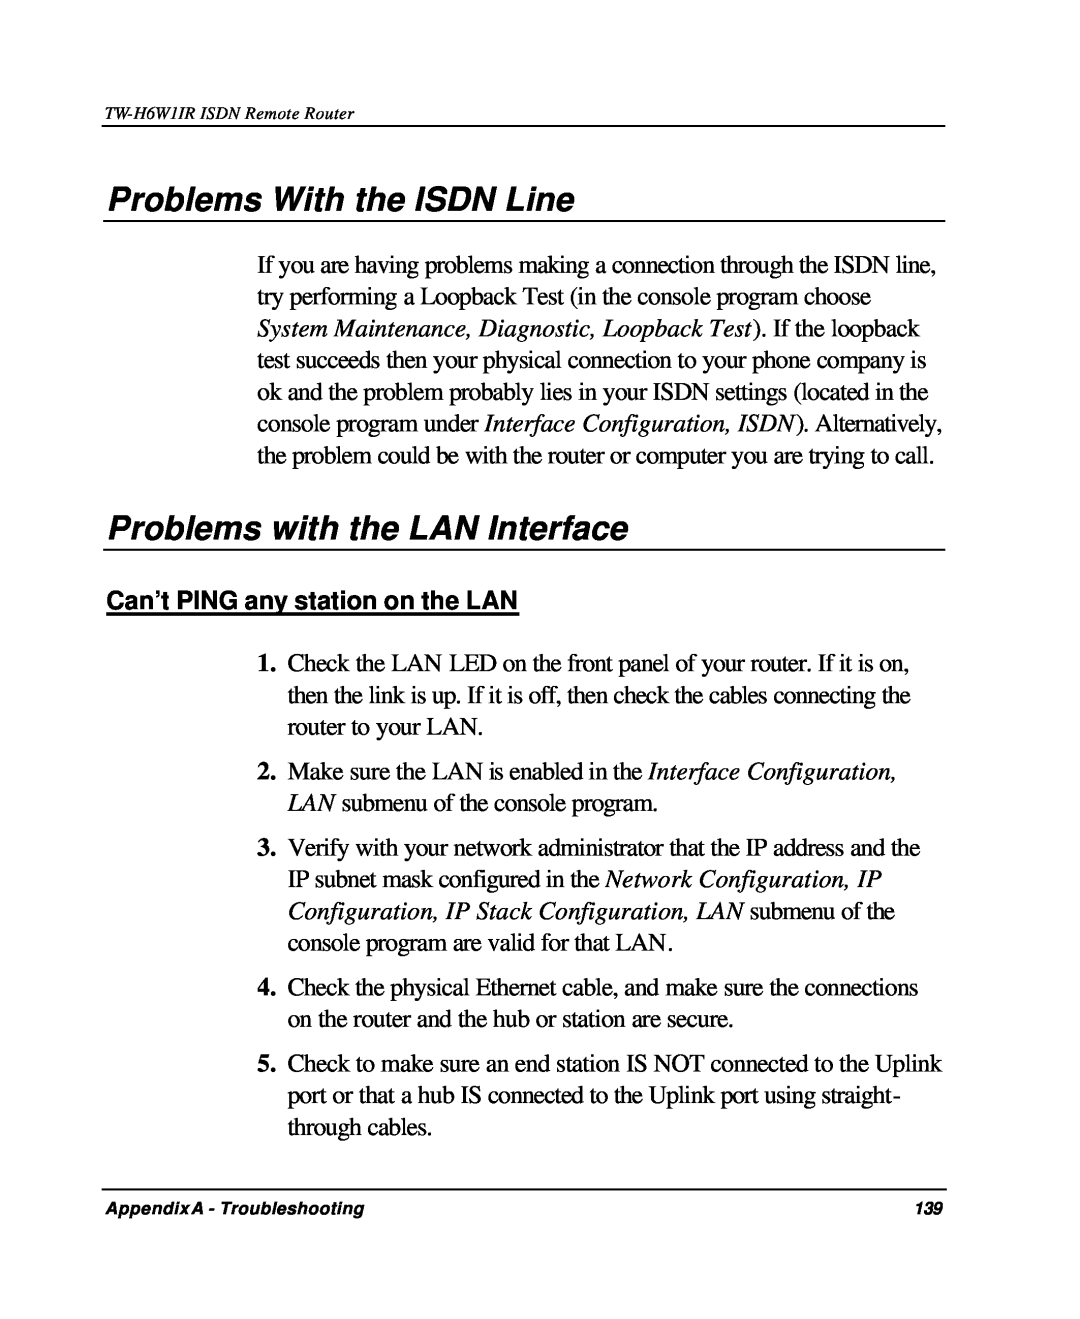 TRENDnet TW-H6W1IR manual Problems With the ISDN Line, Problems with the LAN Interface, Can’t PING any station on the LAN 